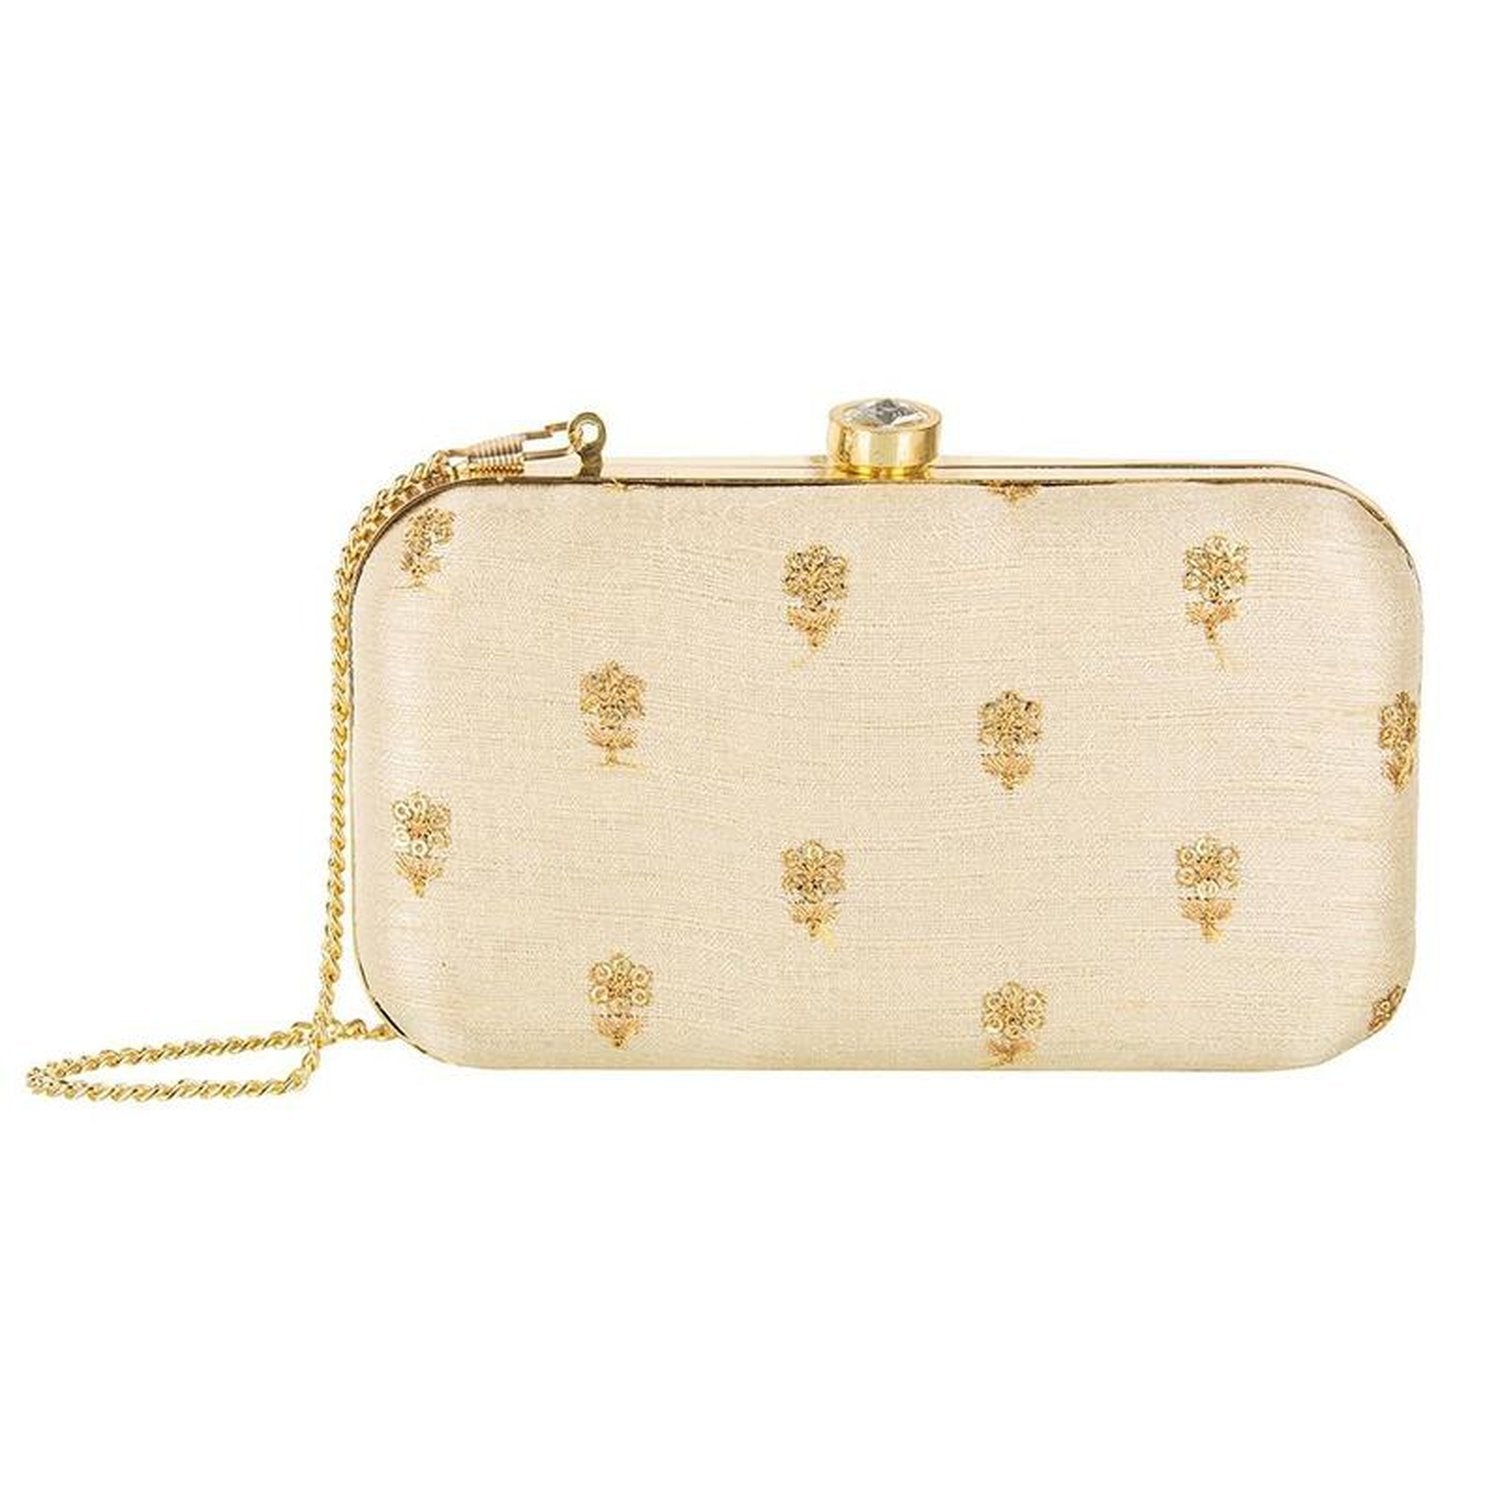 Buy Peach Color Party Style Designer Clutch Bag For Women Online  1469360110587